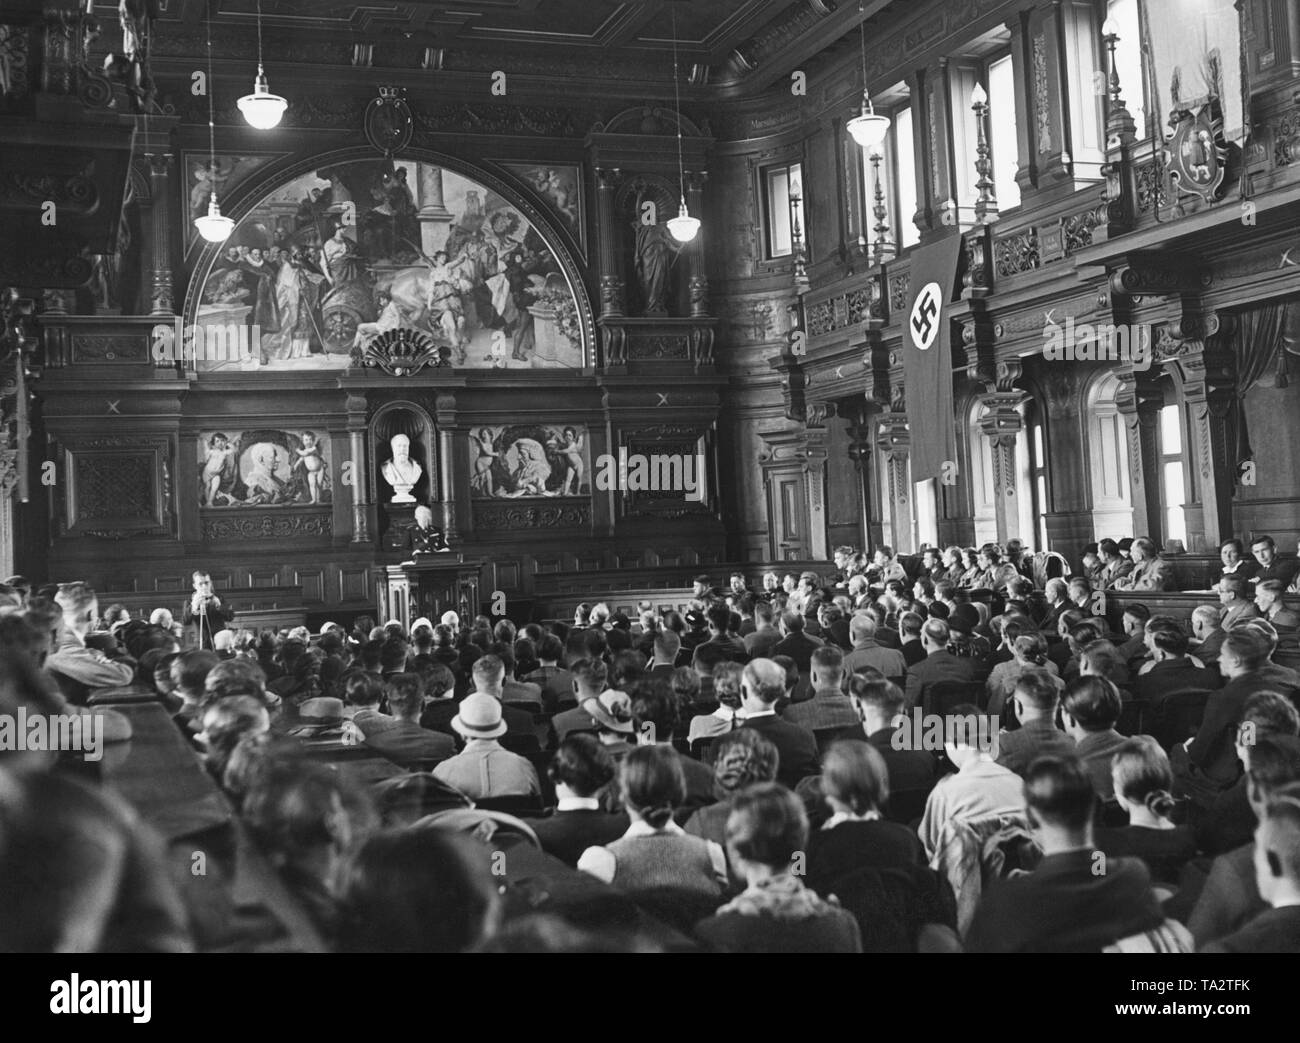 Dr. Paul Schmitthenner, Minister of State and Head of the Ministry of Culture, dressed in SS uniform, gives a lecture in the auditorium filled with listeners in the building of the Old Heidelberg University.A swastika flag is hanging on the wall.The photo was taken on the occasion of the 550th anniversary of the Heidelberg University. Stock Photo